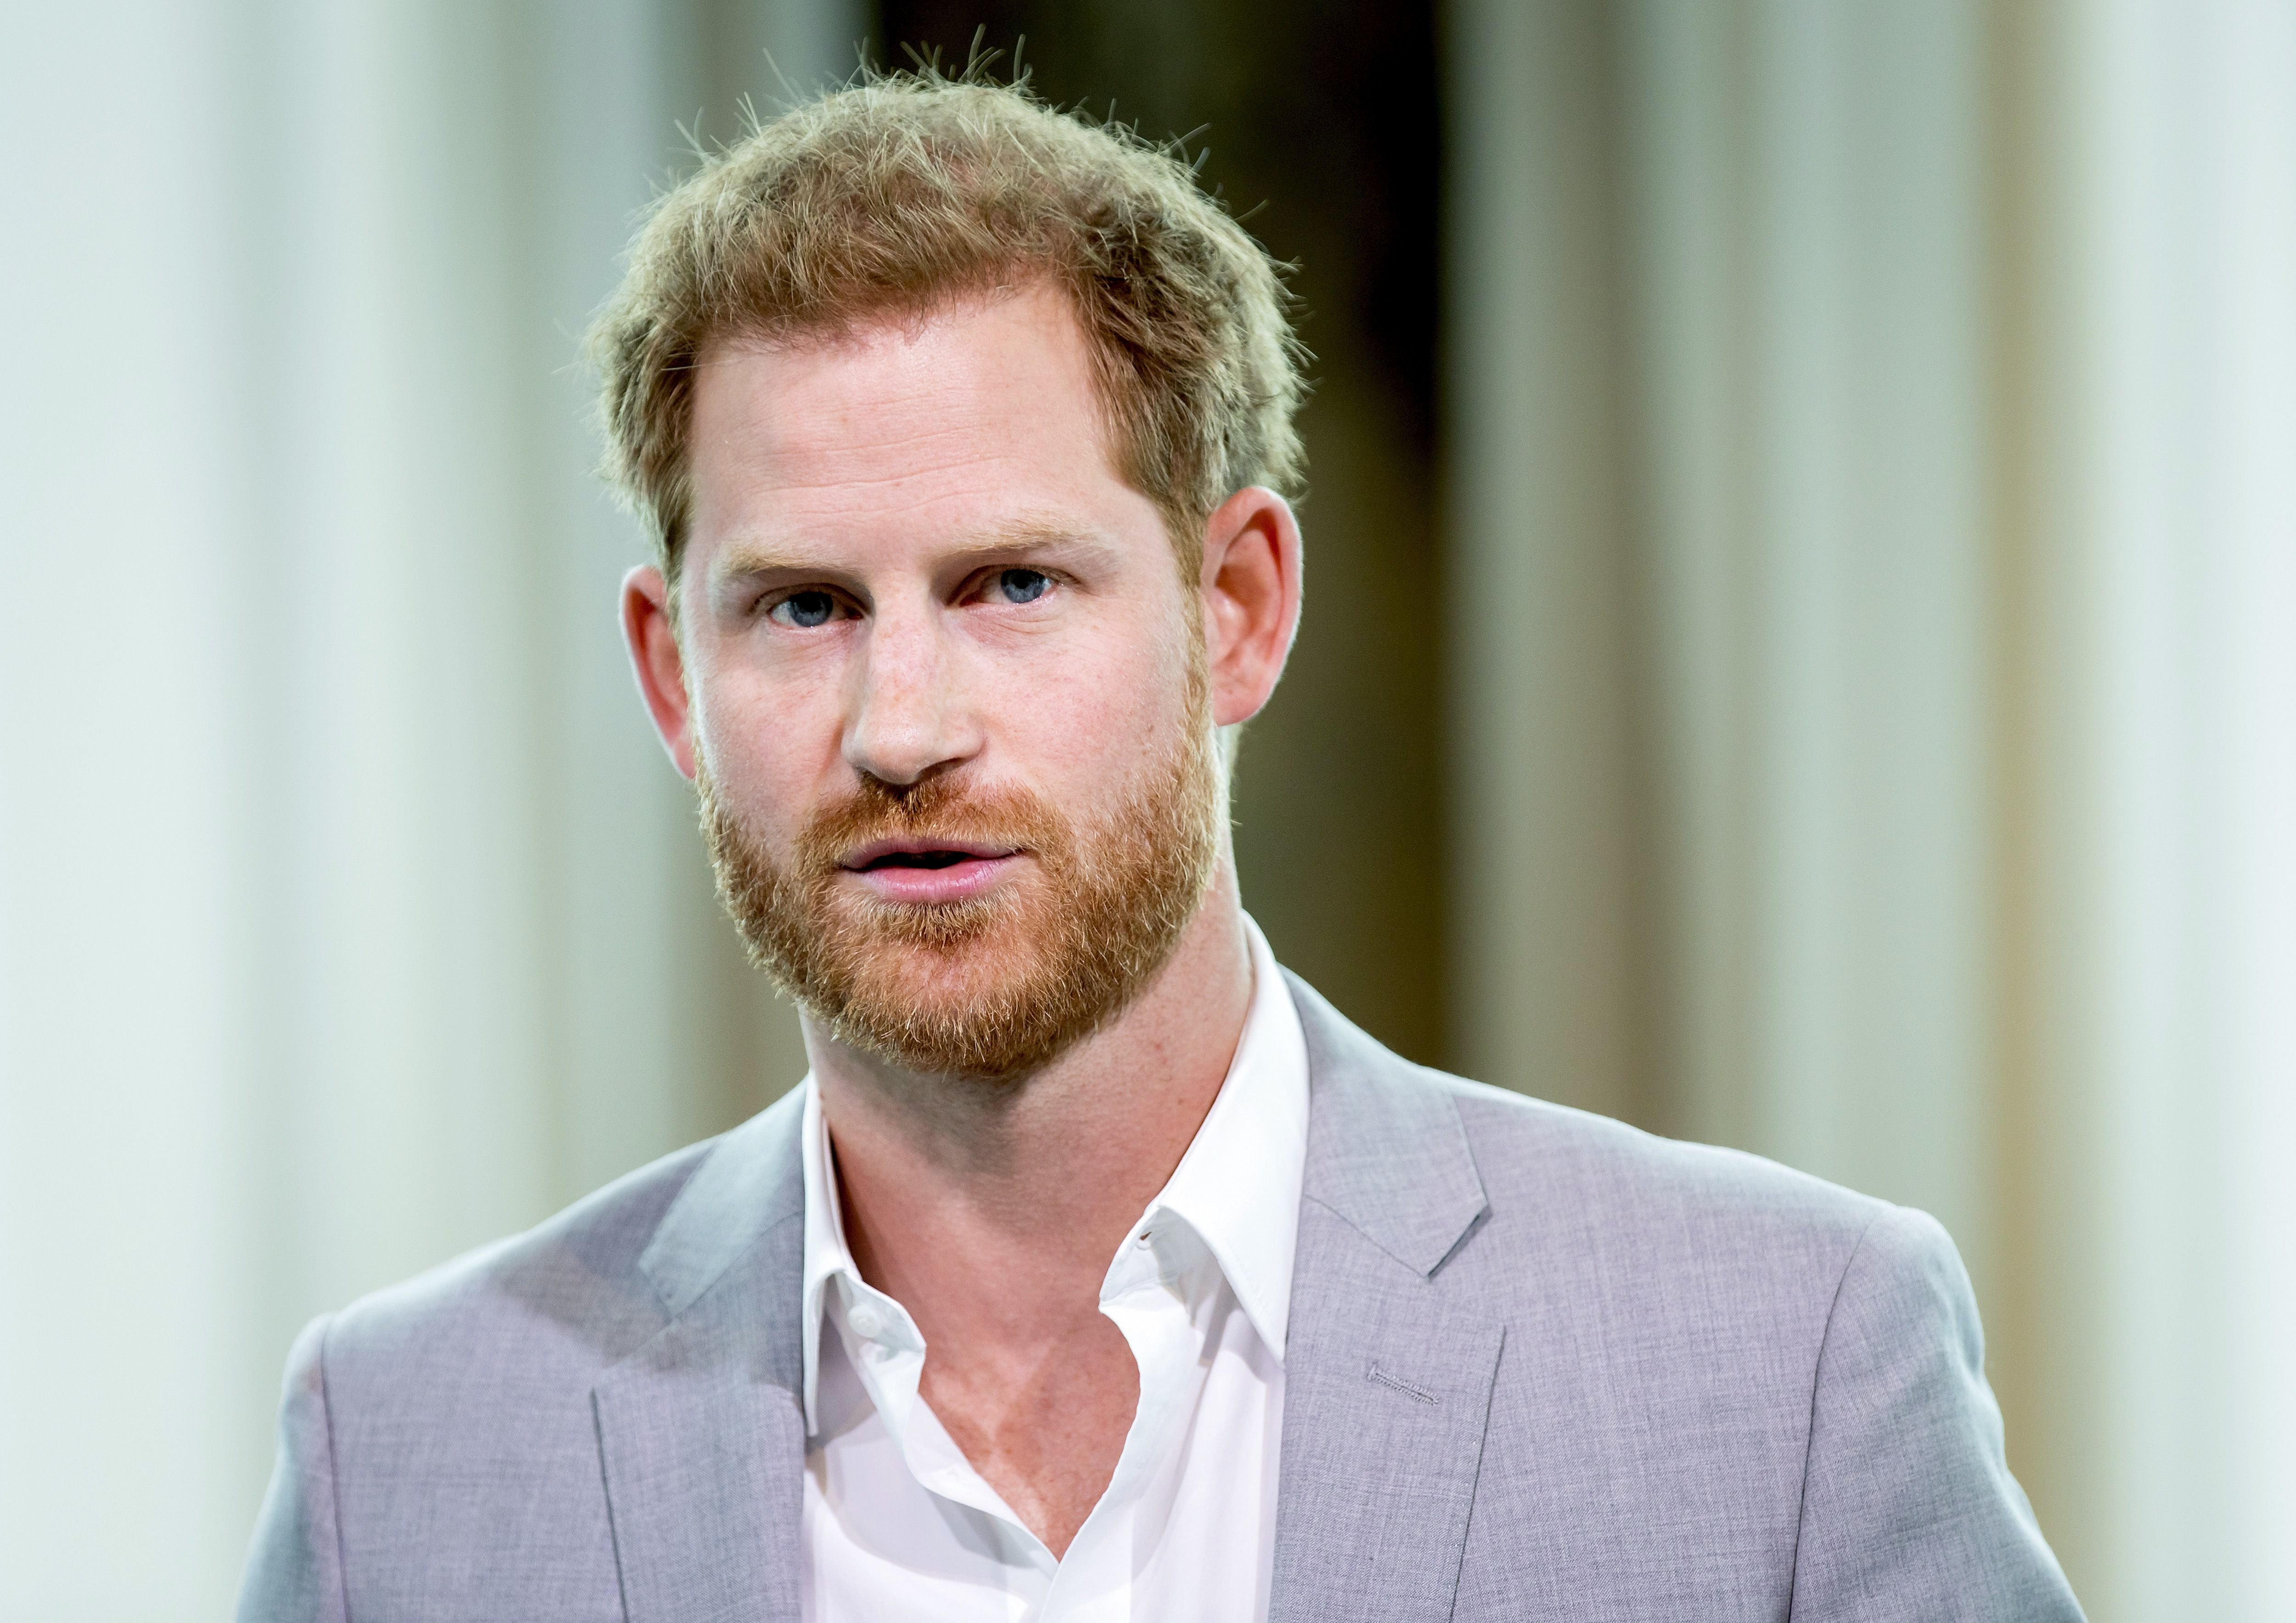 Prince Harry attending the Adam Tower project on September 3, 2019 in Amsterdam. / Source: Getty Images